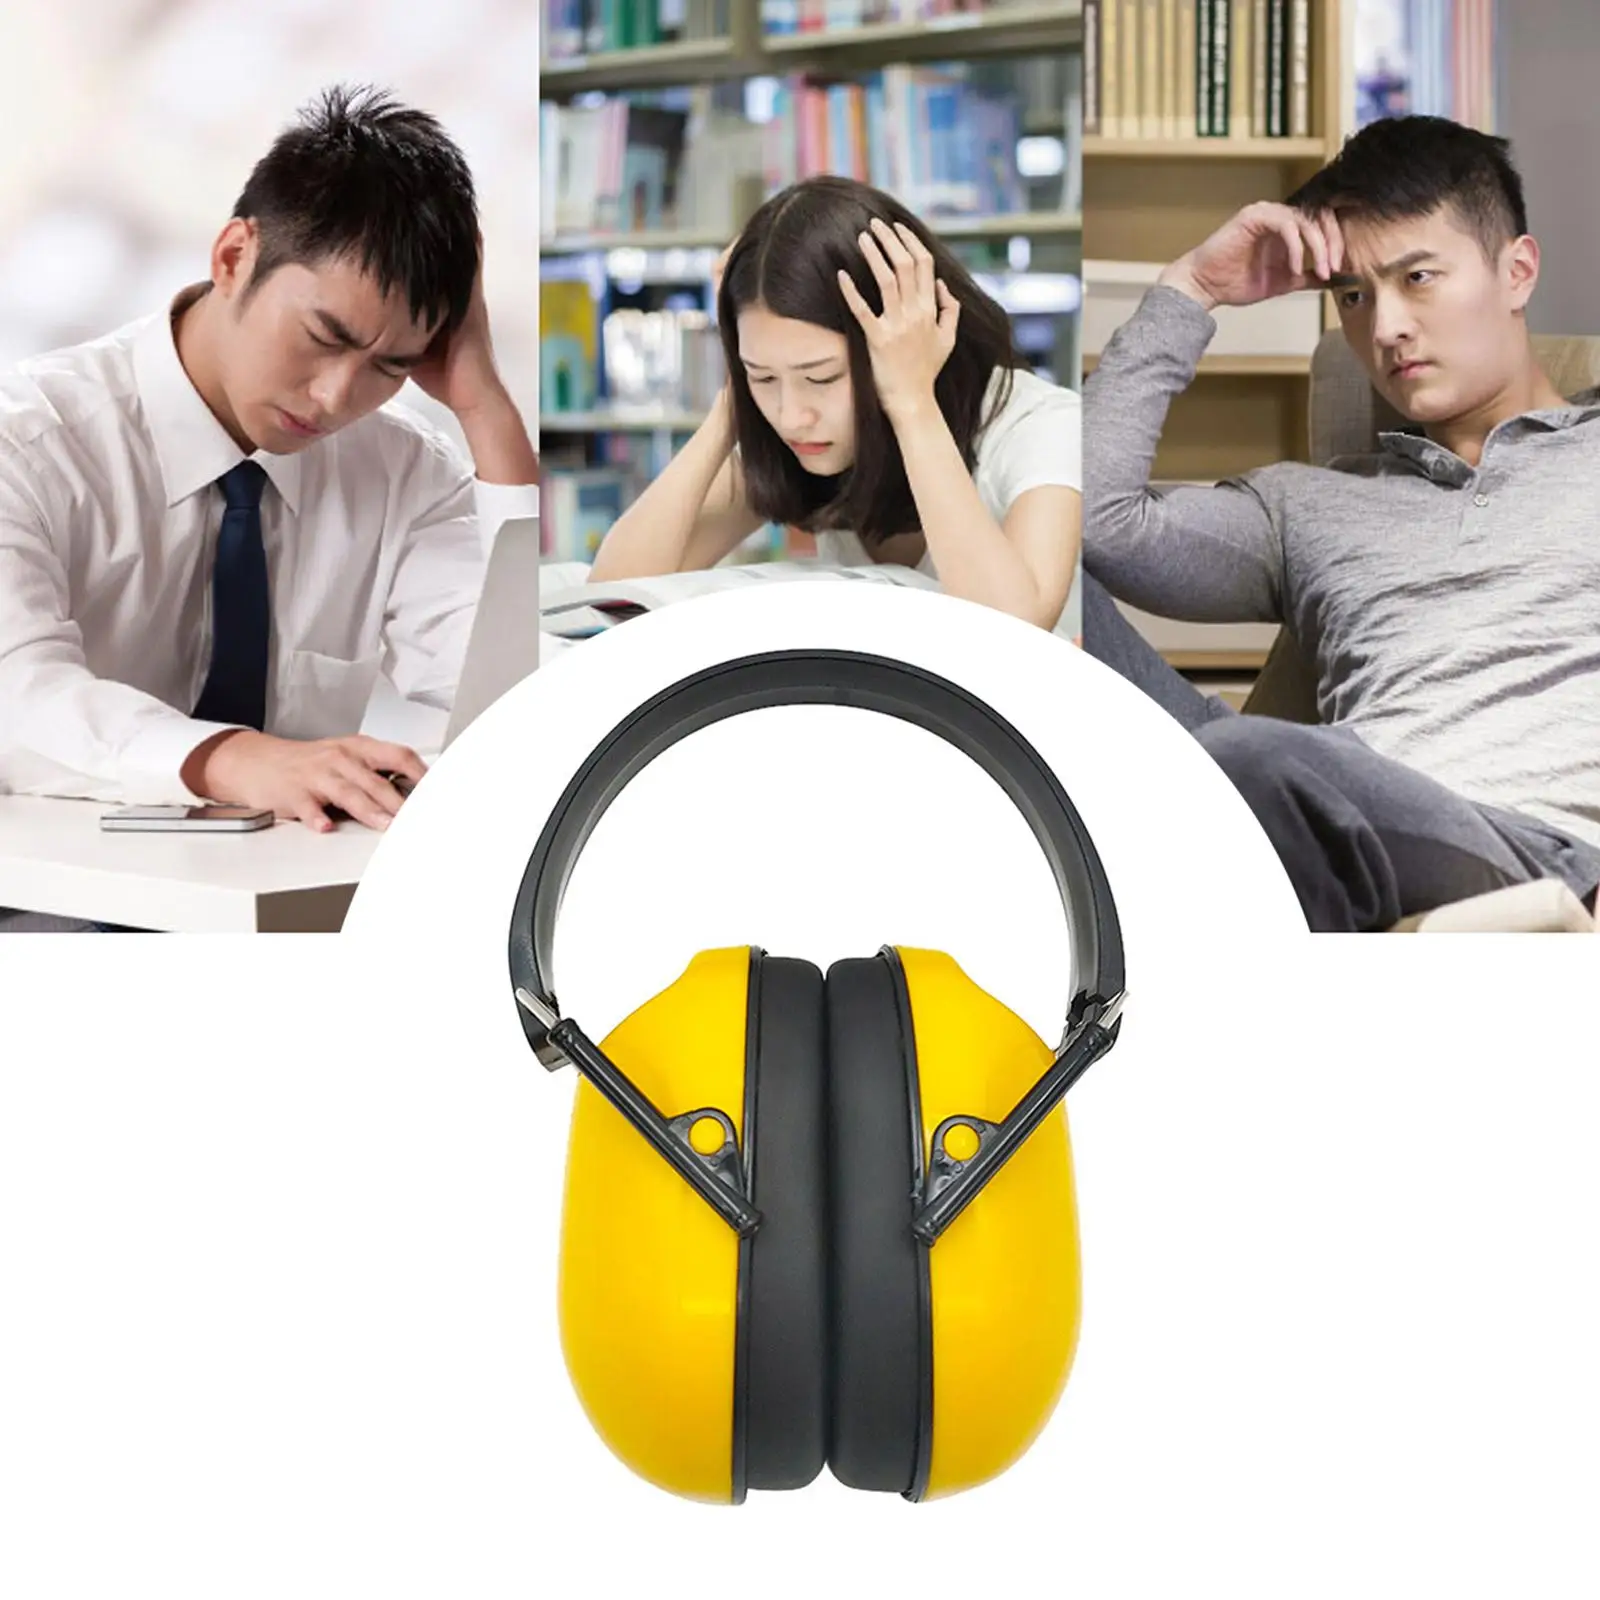 Toddler Earmuffs Noise Cancelling Lightweight Headphones Children Earmuffs Headband Ear Defenders for Airports Concerts Shooting